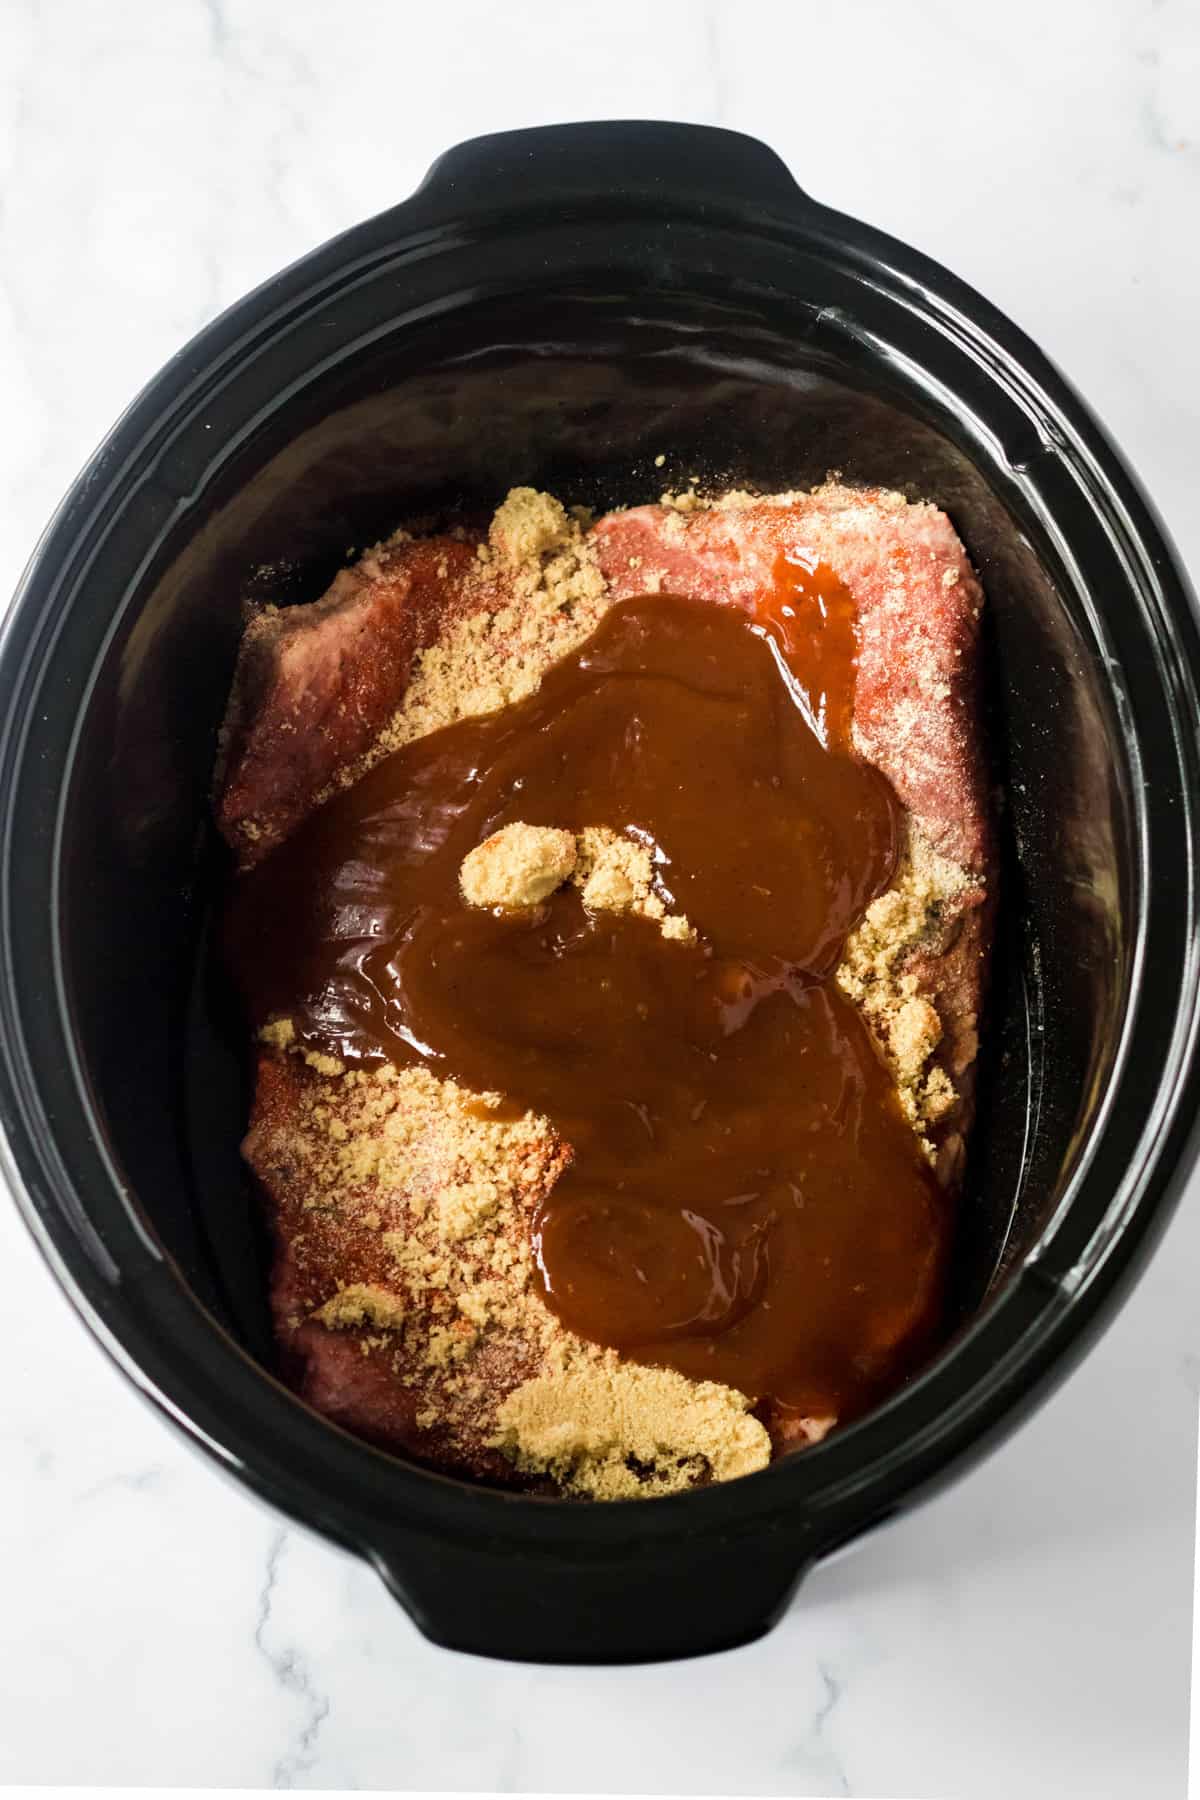 Brisket in slow cooker covered in seasonings and BBQ sauce.